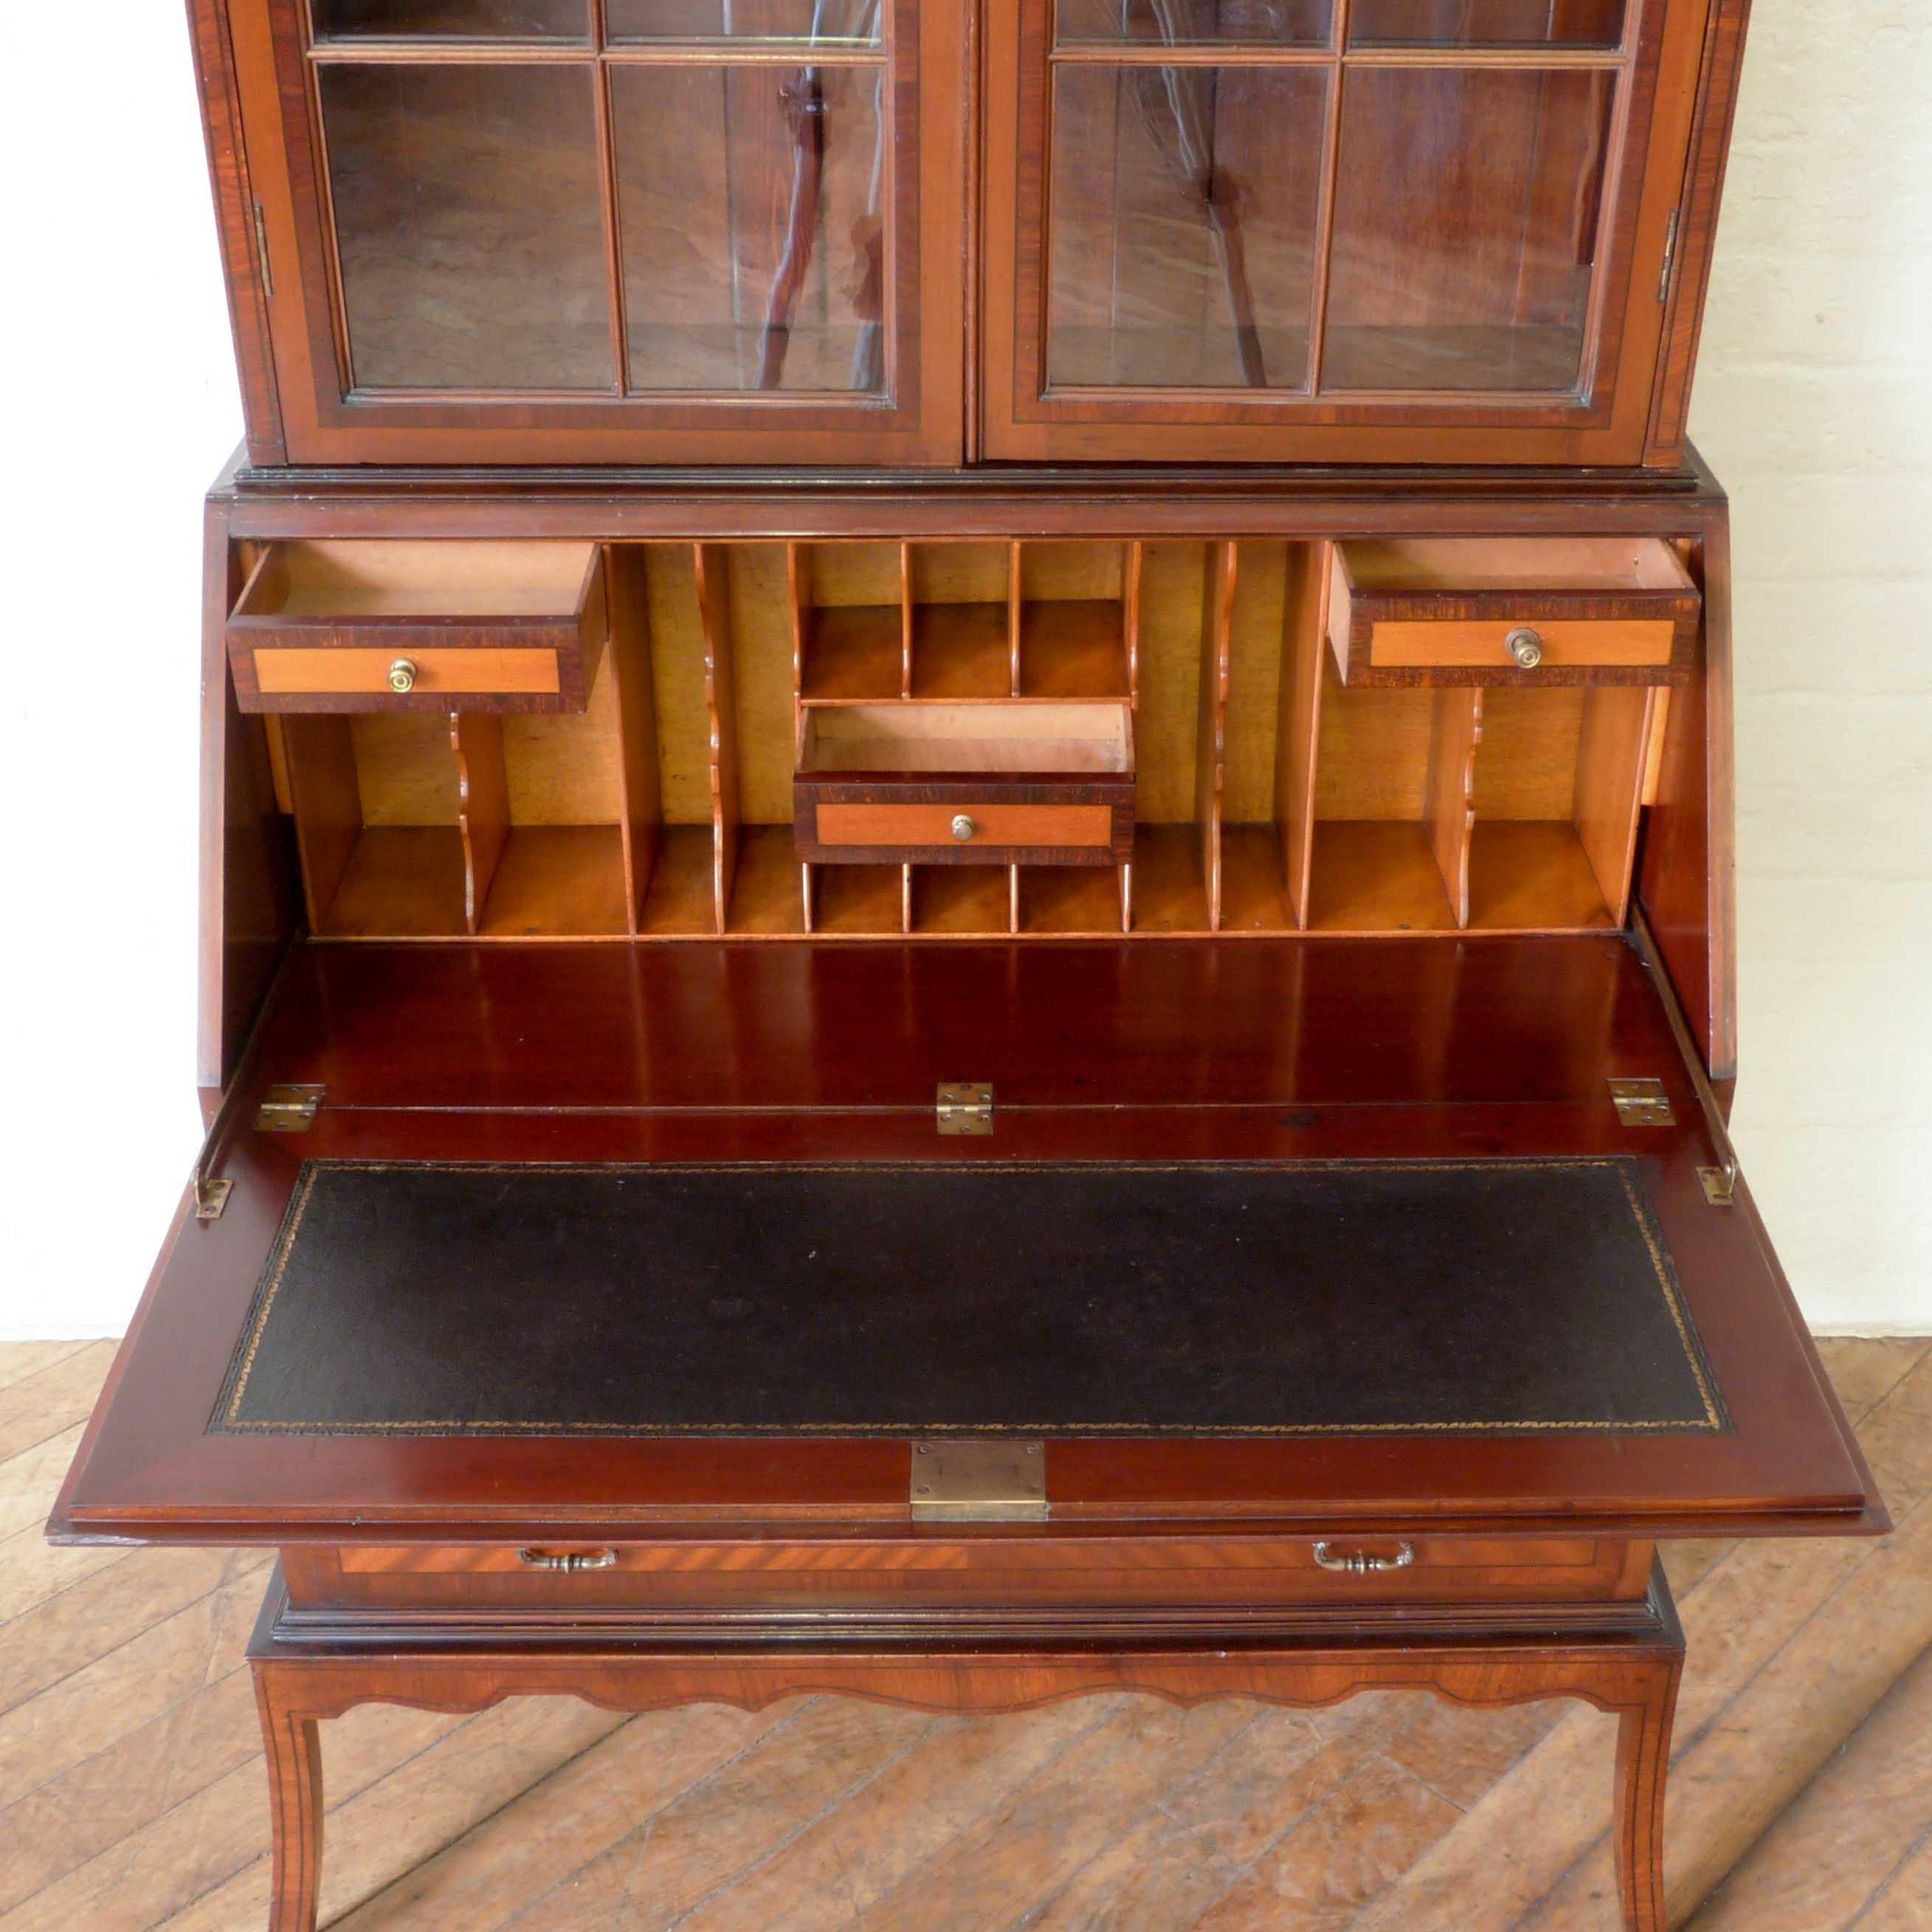 This is an elegant mahogany bureau bookcase from the Edwardian period and very much in the style of George Hepplewhite from the late 18th century. Crossbanded throughout in rosewood and ebony with a wonderful geometric inlay to the fall of the